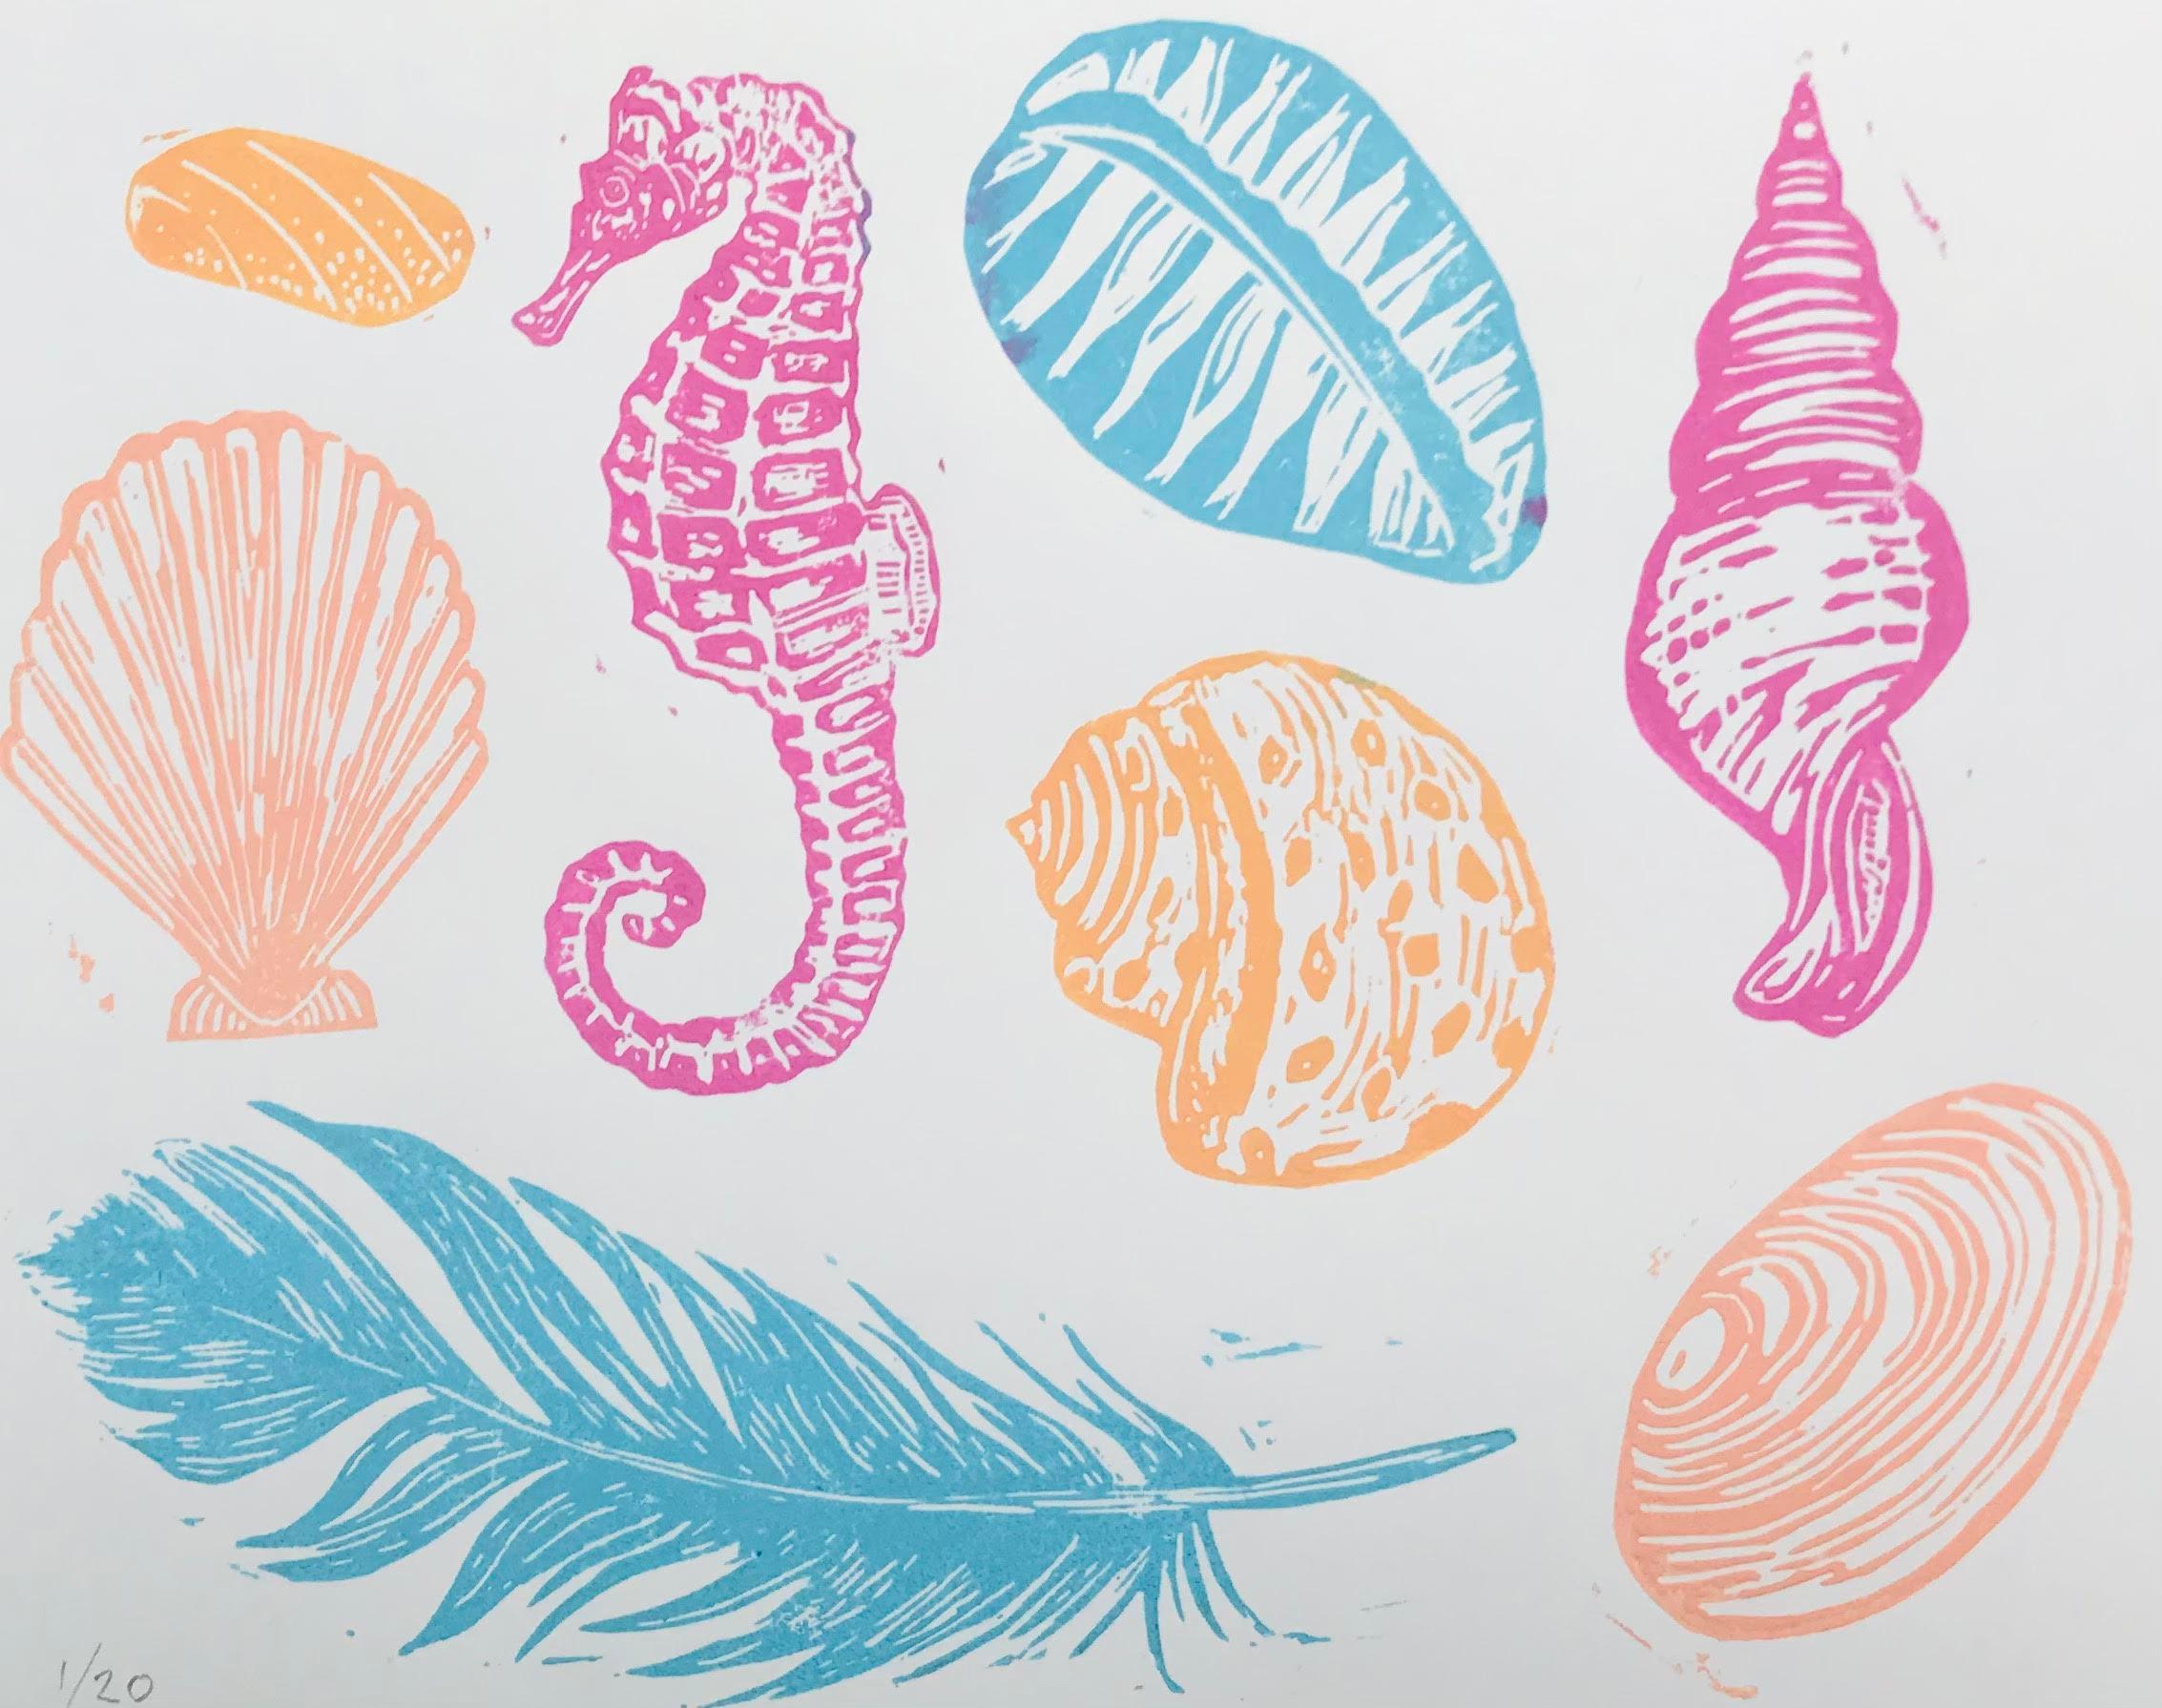 Seaweed, Seashells and Sea Finds - Contemporary Print by Joanna Padfield